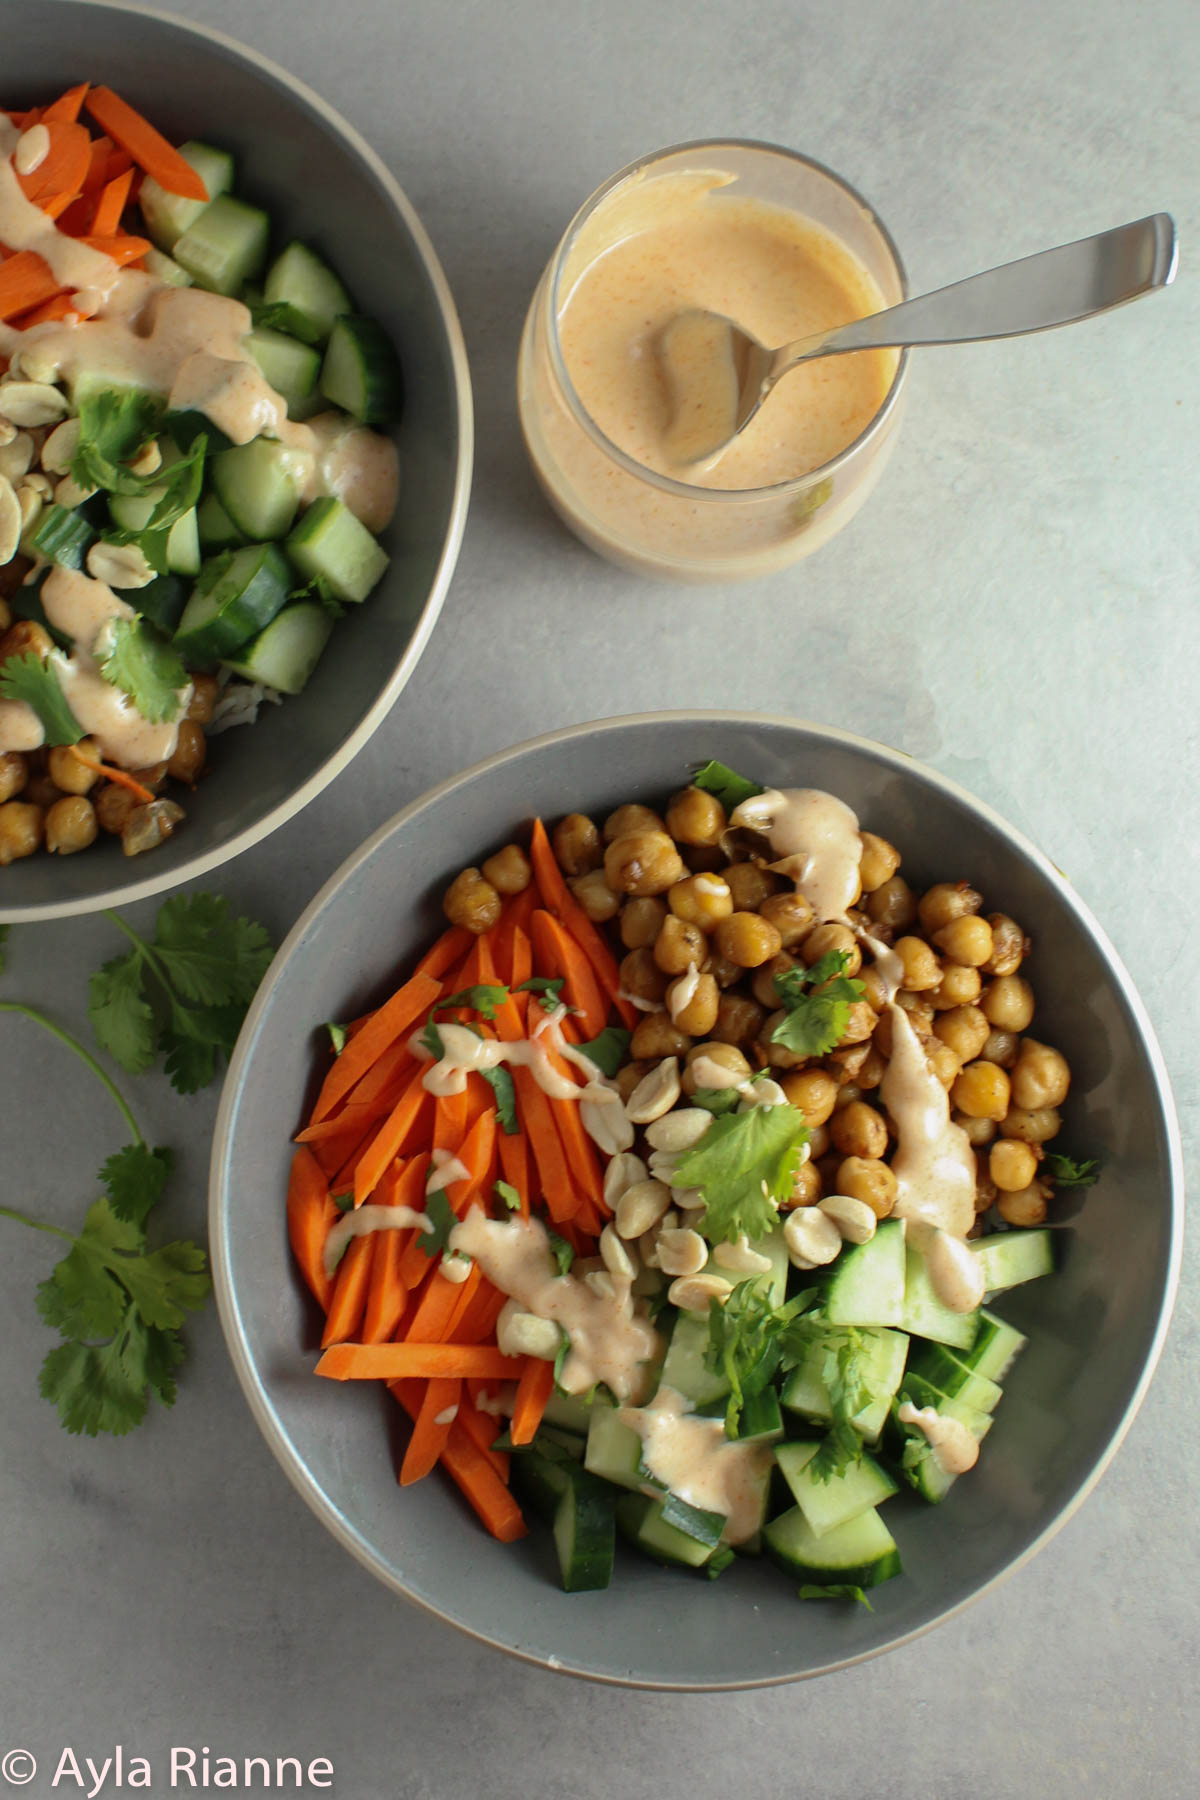 One full yum yum bowl with carrots, cucumbers, chickpeas and yum yum sauce. One partial yum yum bowl and one cup of yum yum sauce.